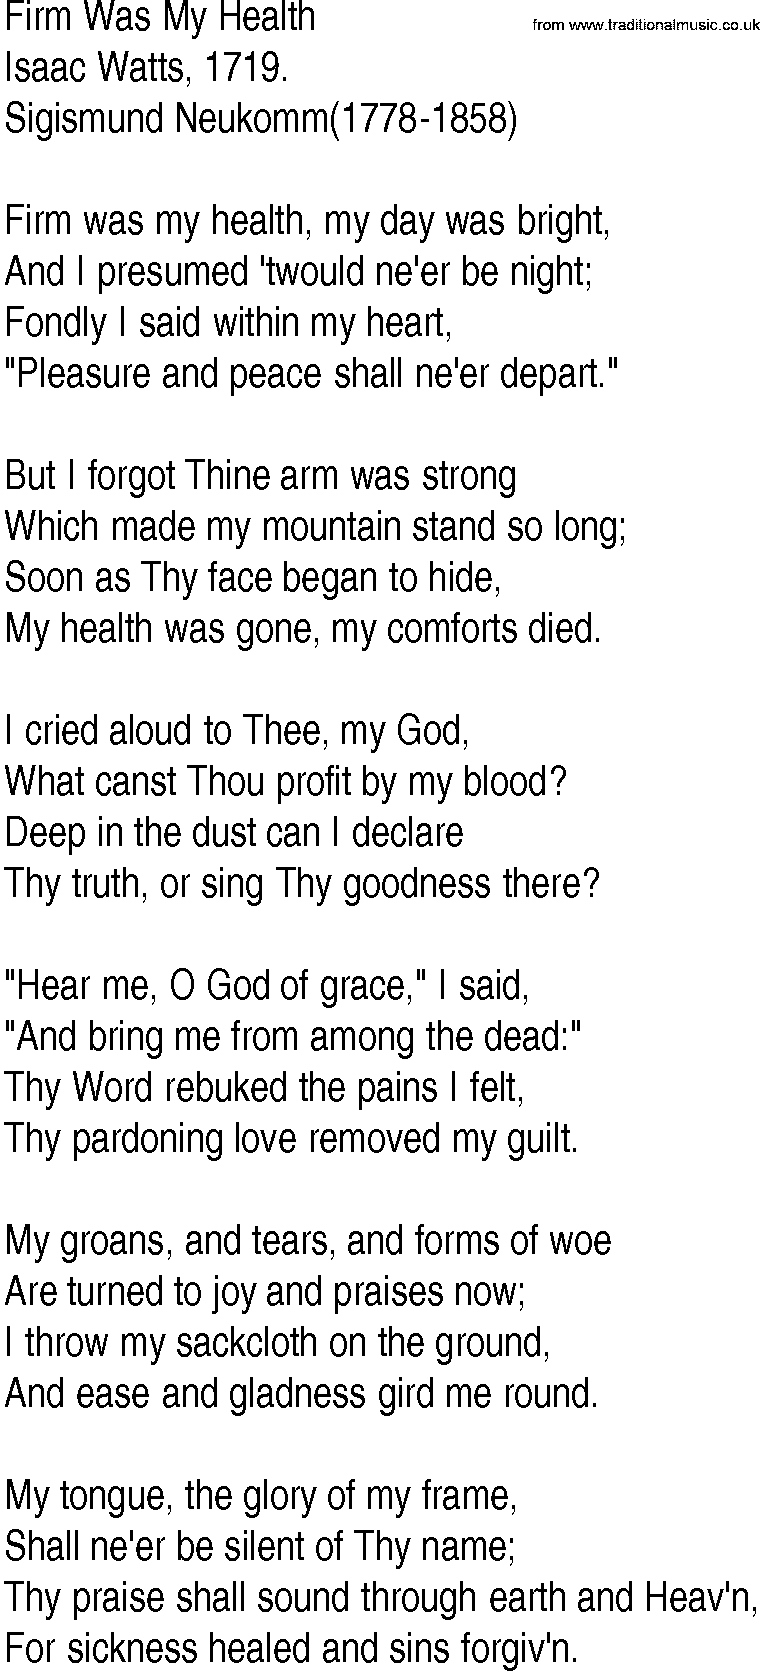 Hymn and Gospel Song: Firm Was My Health by Isaac Watts lyrics